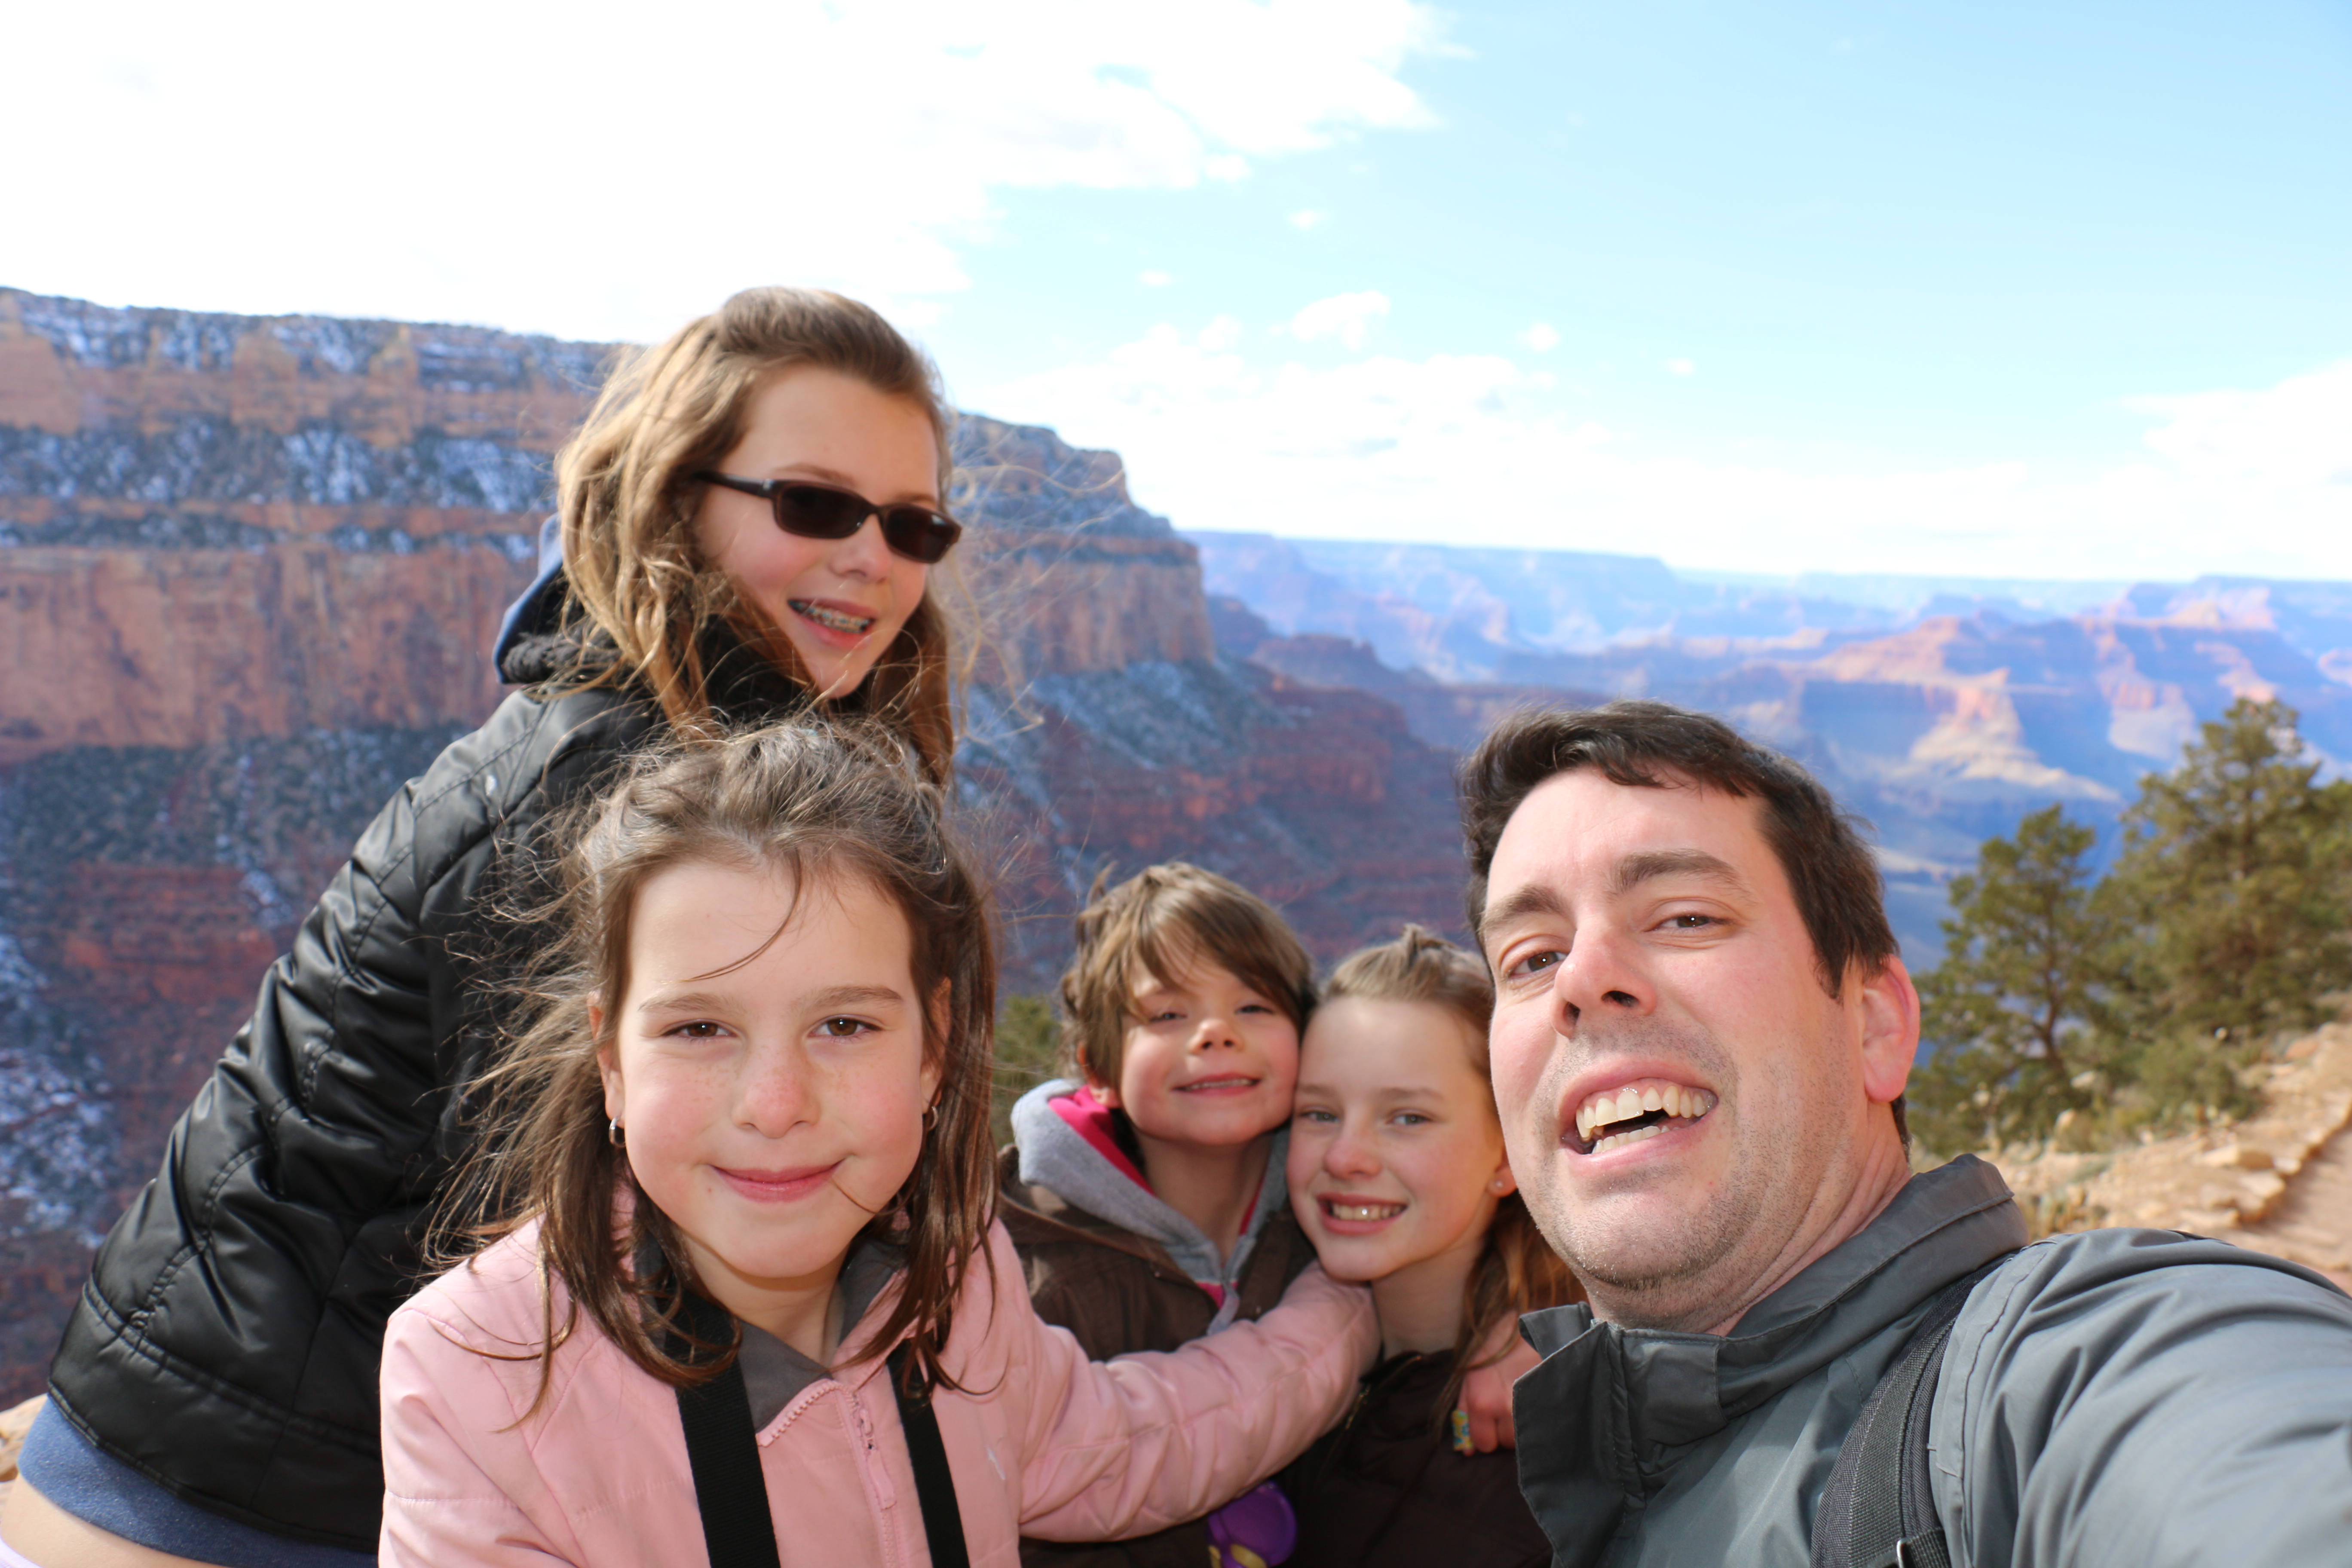 Day 7 – Second visit to Grand Canyon National Park